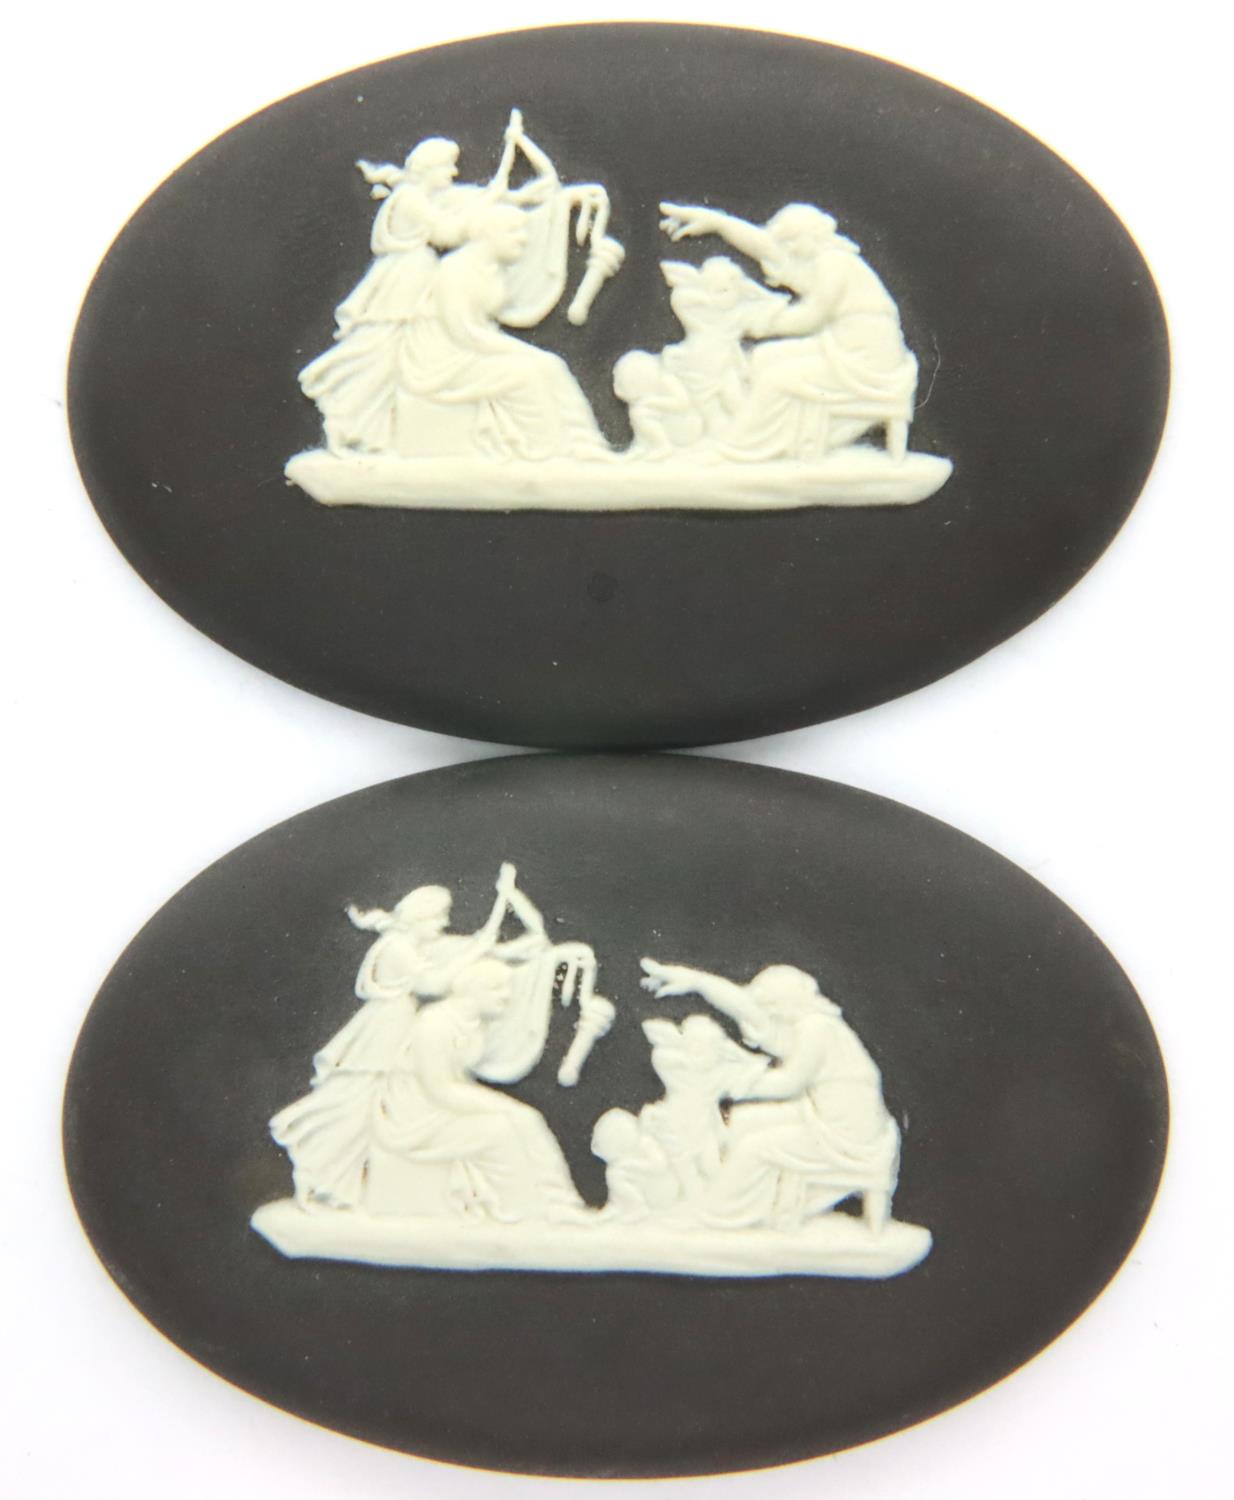 Pair of Wedgwood black and white jasperware plaques, each L: 45 mm. P&P Group 1 (£14+VAT for the